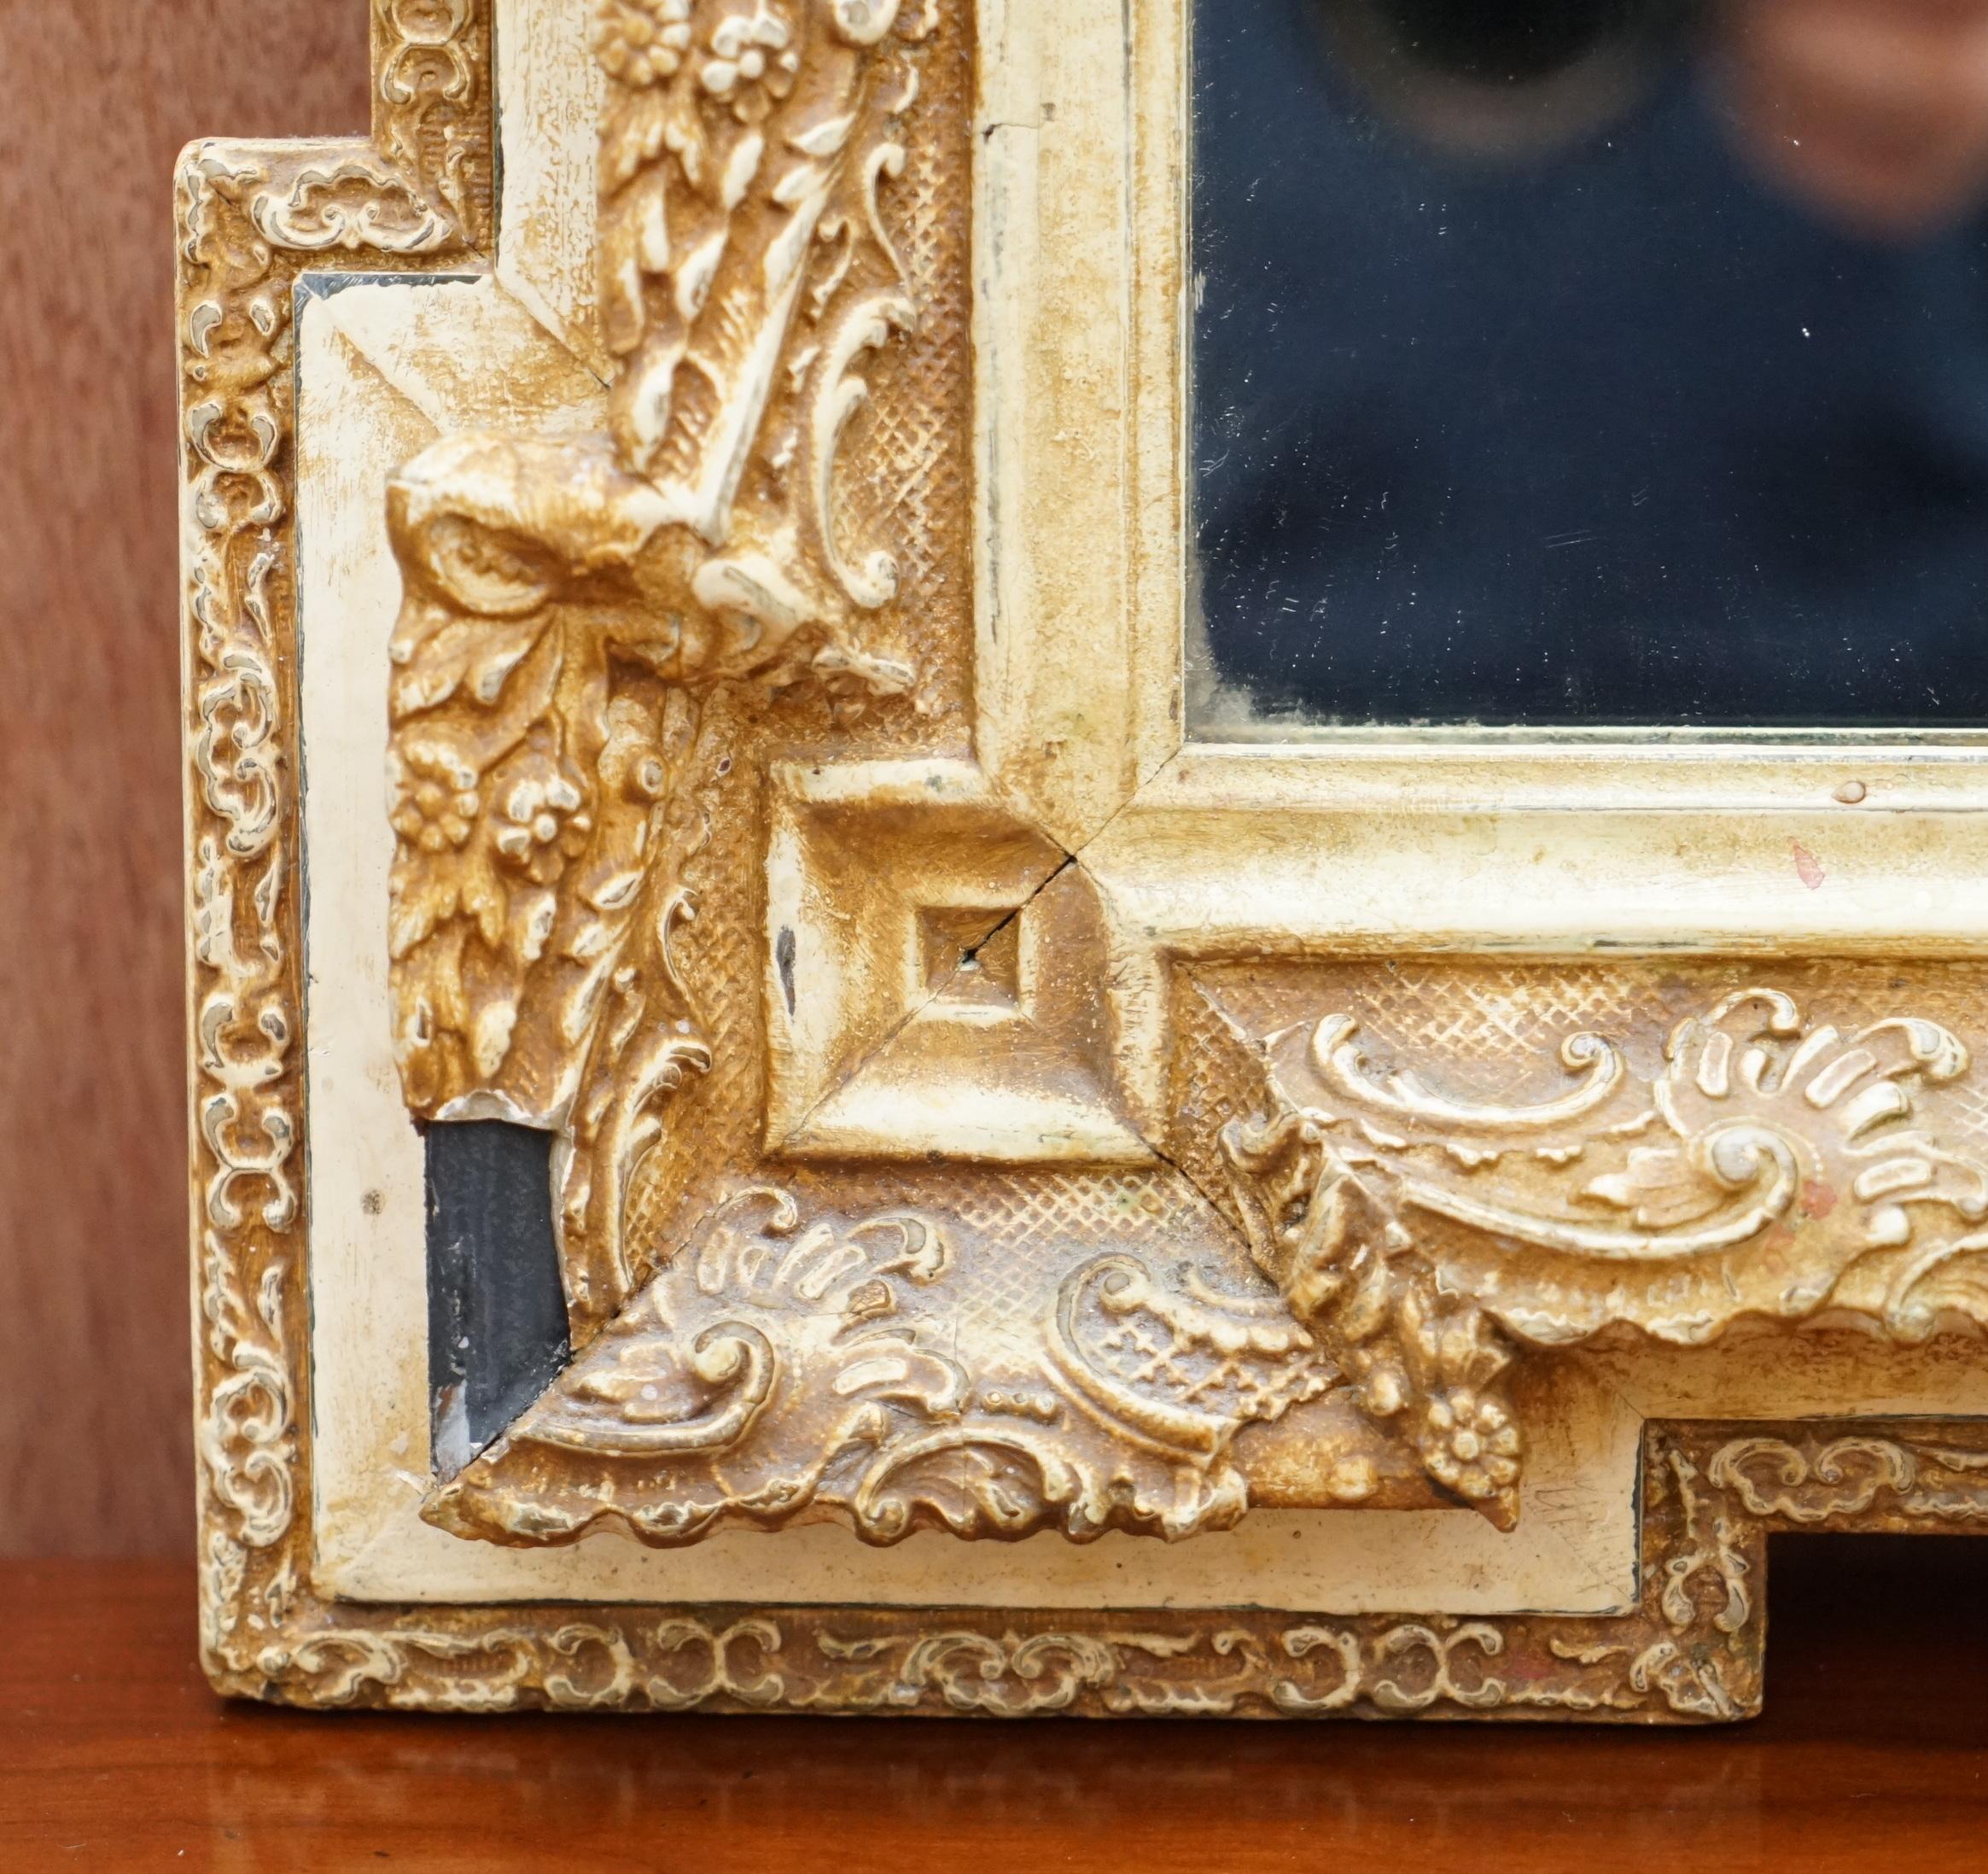 Mid-20th Century Ornately Decorated Wedding Mirror Depicting Two Turtle Doves Kissing Gilt Decor For Sale